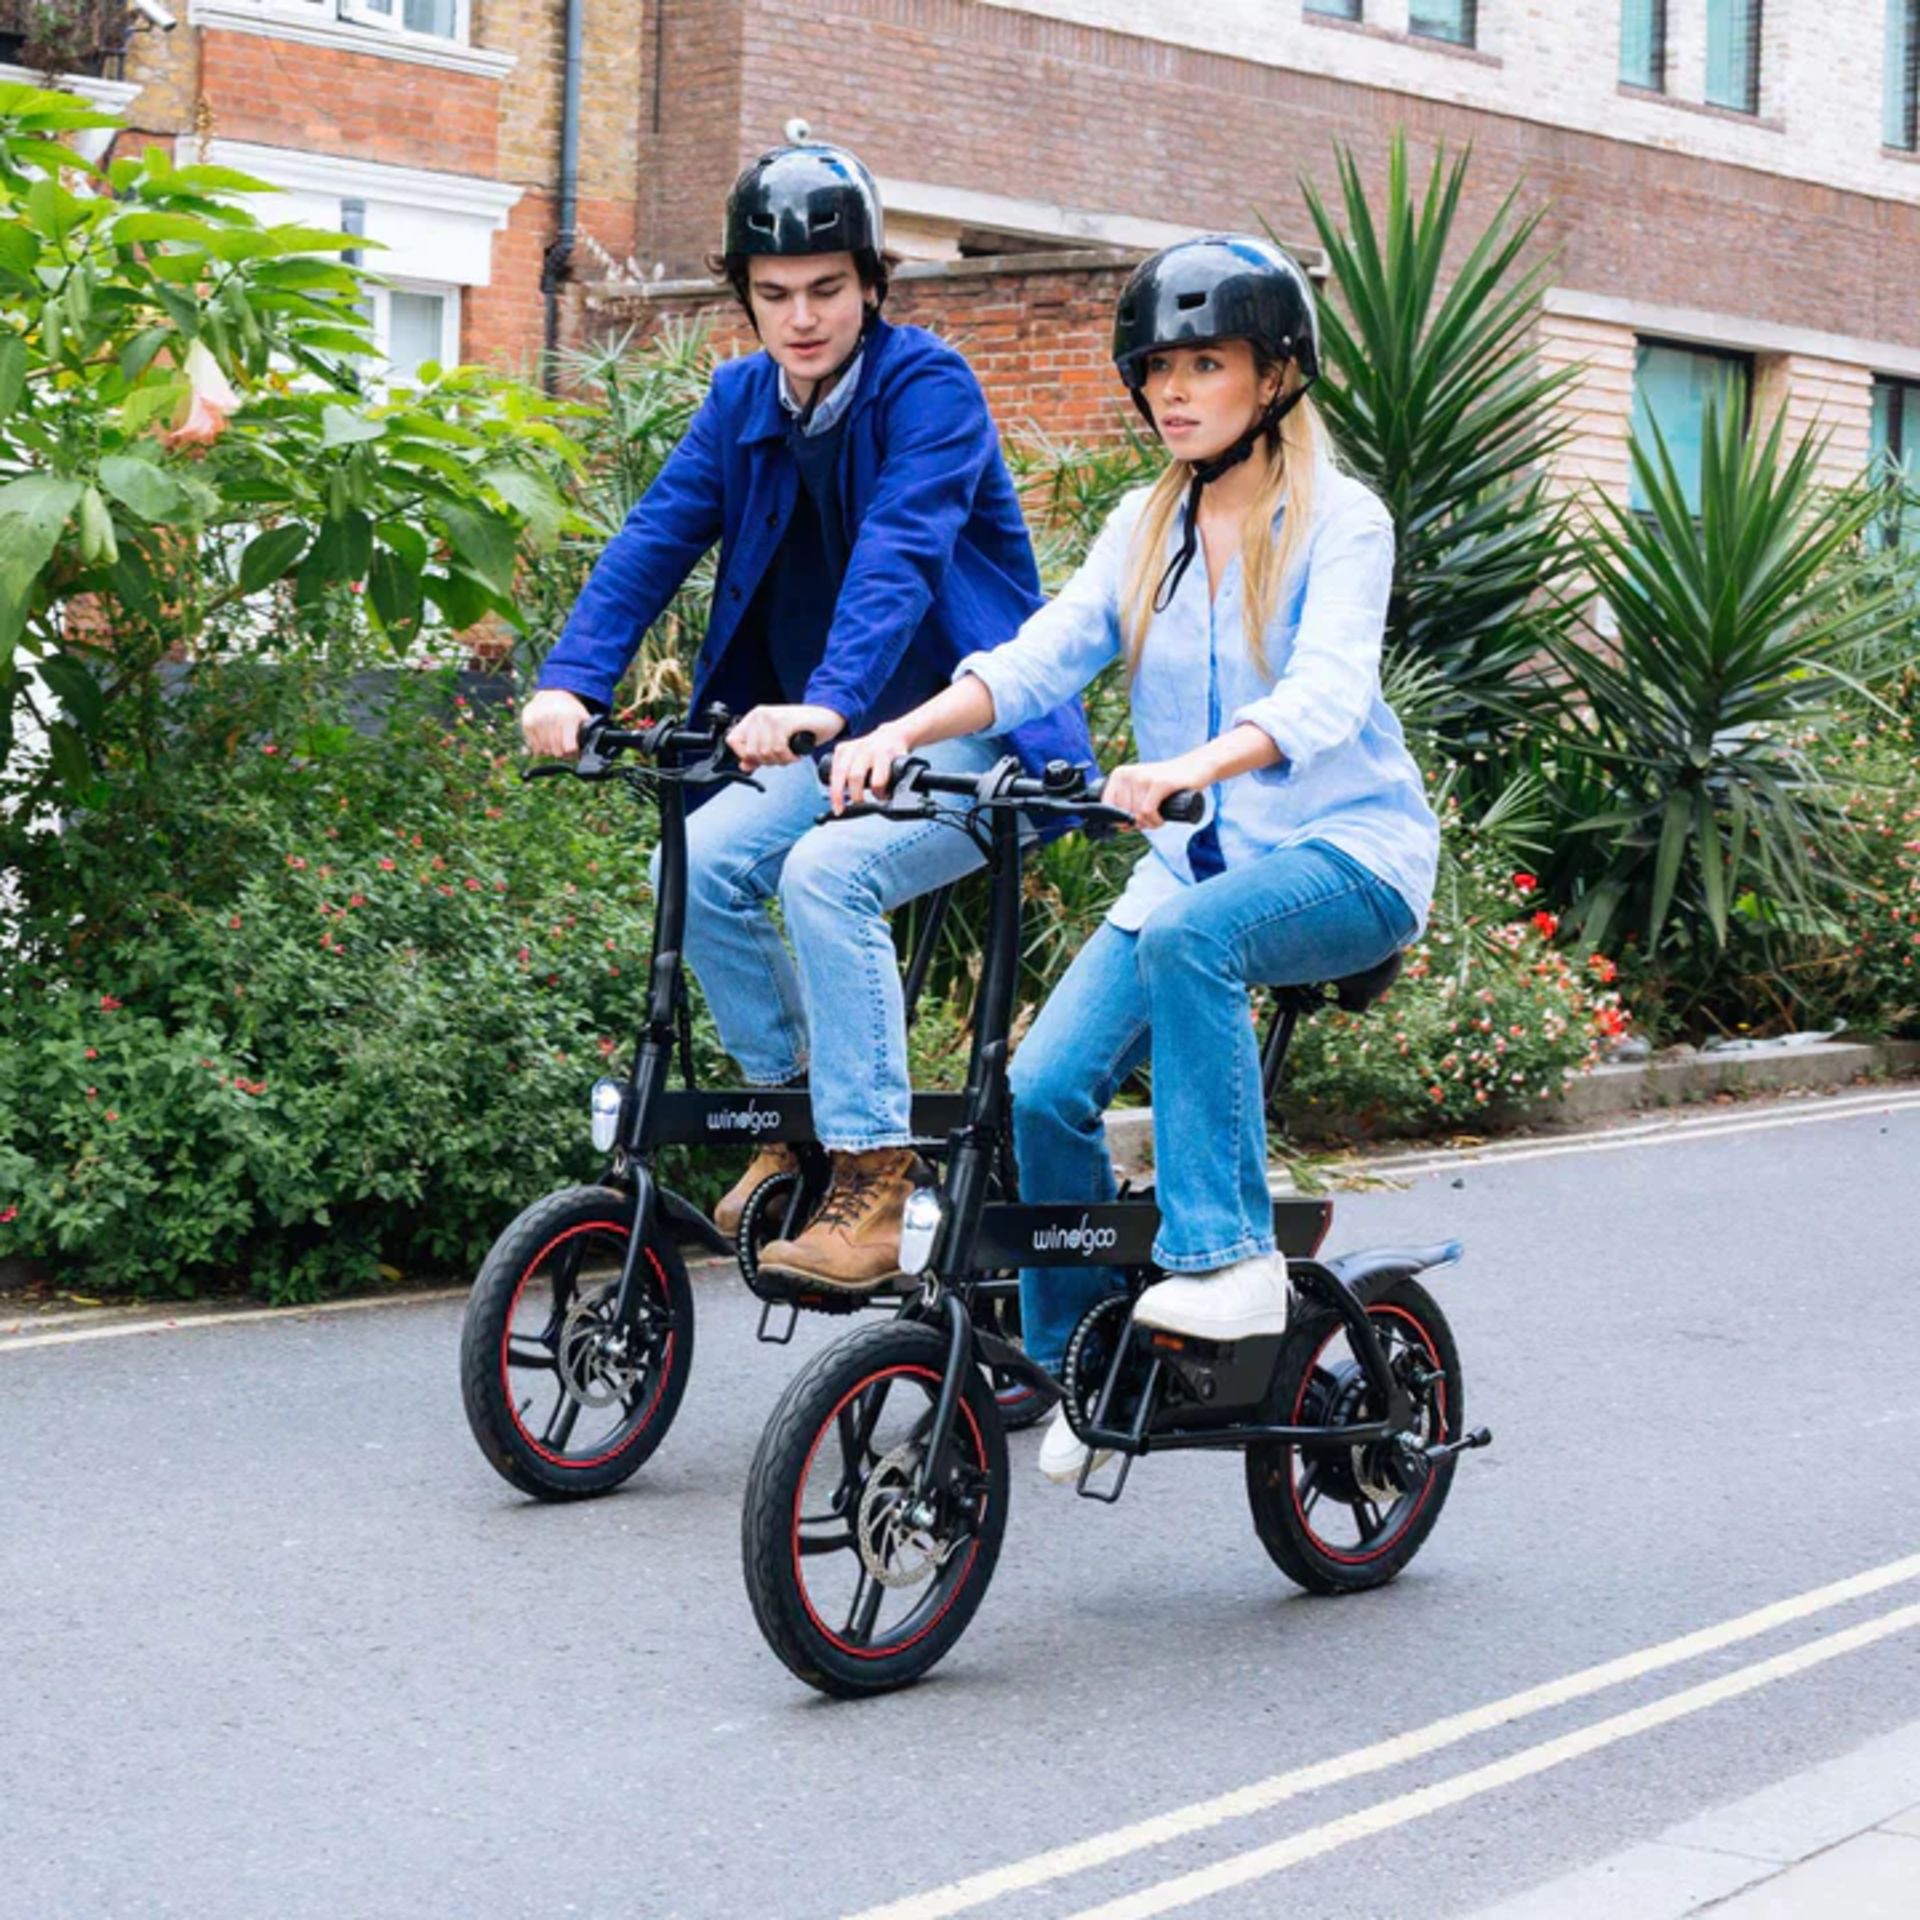 5 X Windgoo B20 Pro Electric Bike. RRP £1,100.99. With 16-inch-wide tires and a frame of upgraded - Image 4 of 7